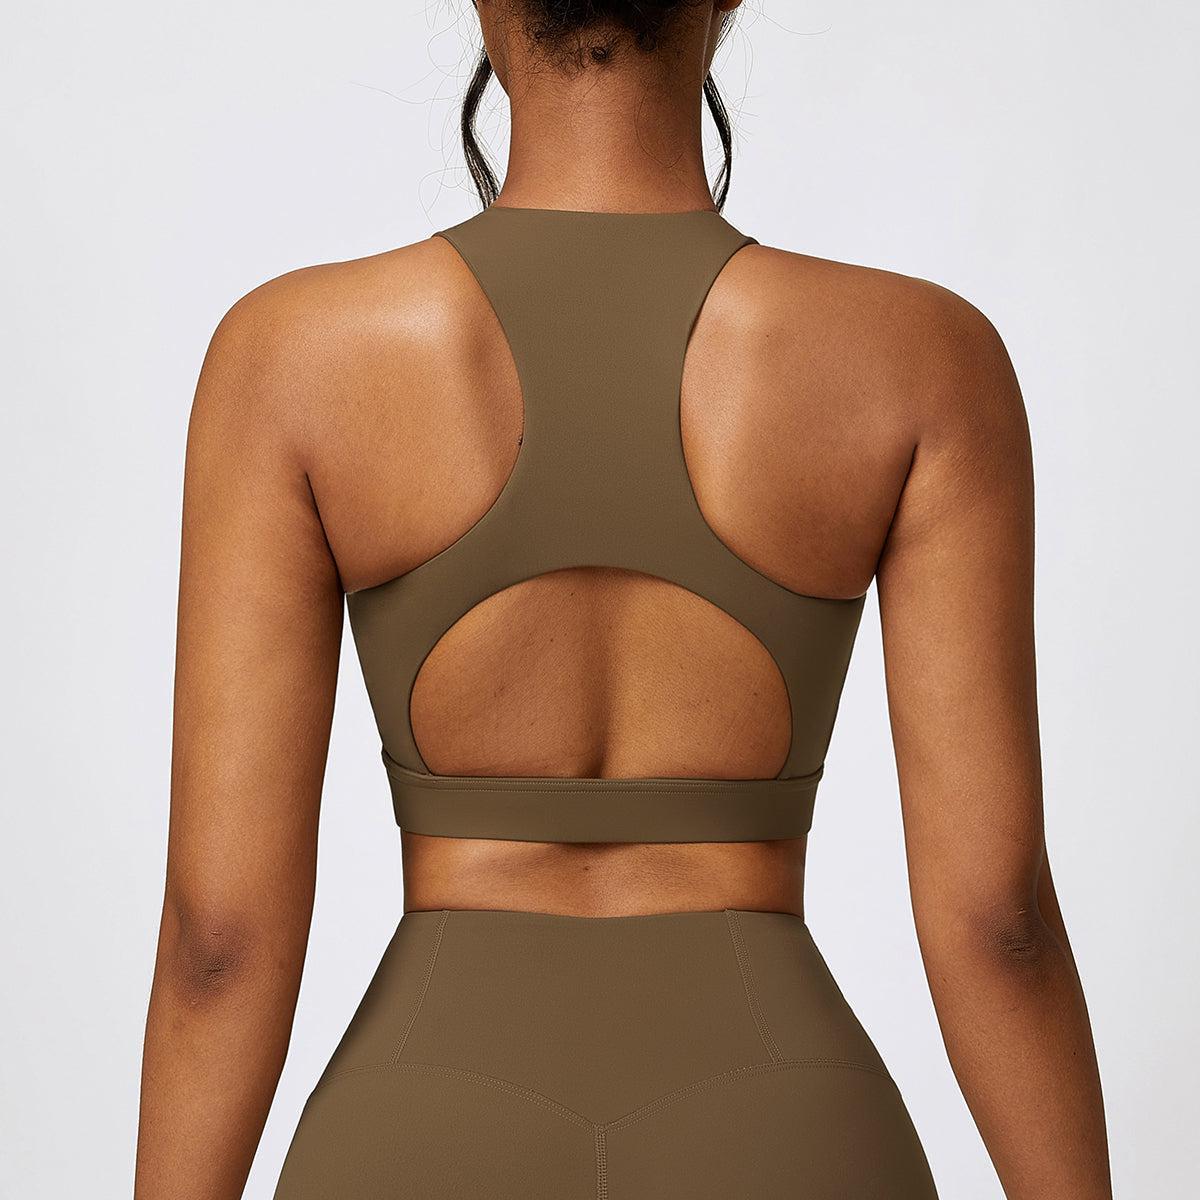 the back of a woman wearing a brown sports bra